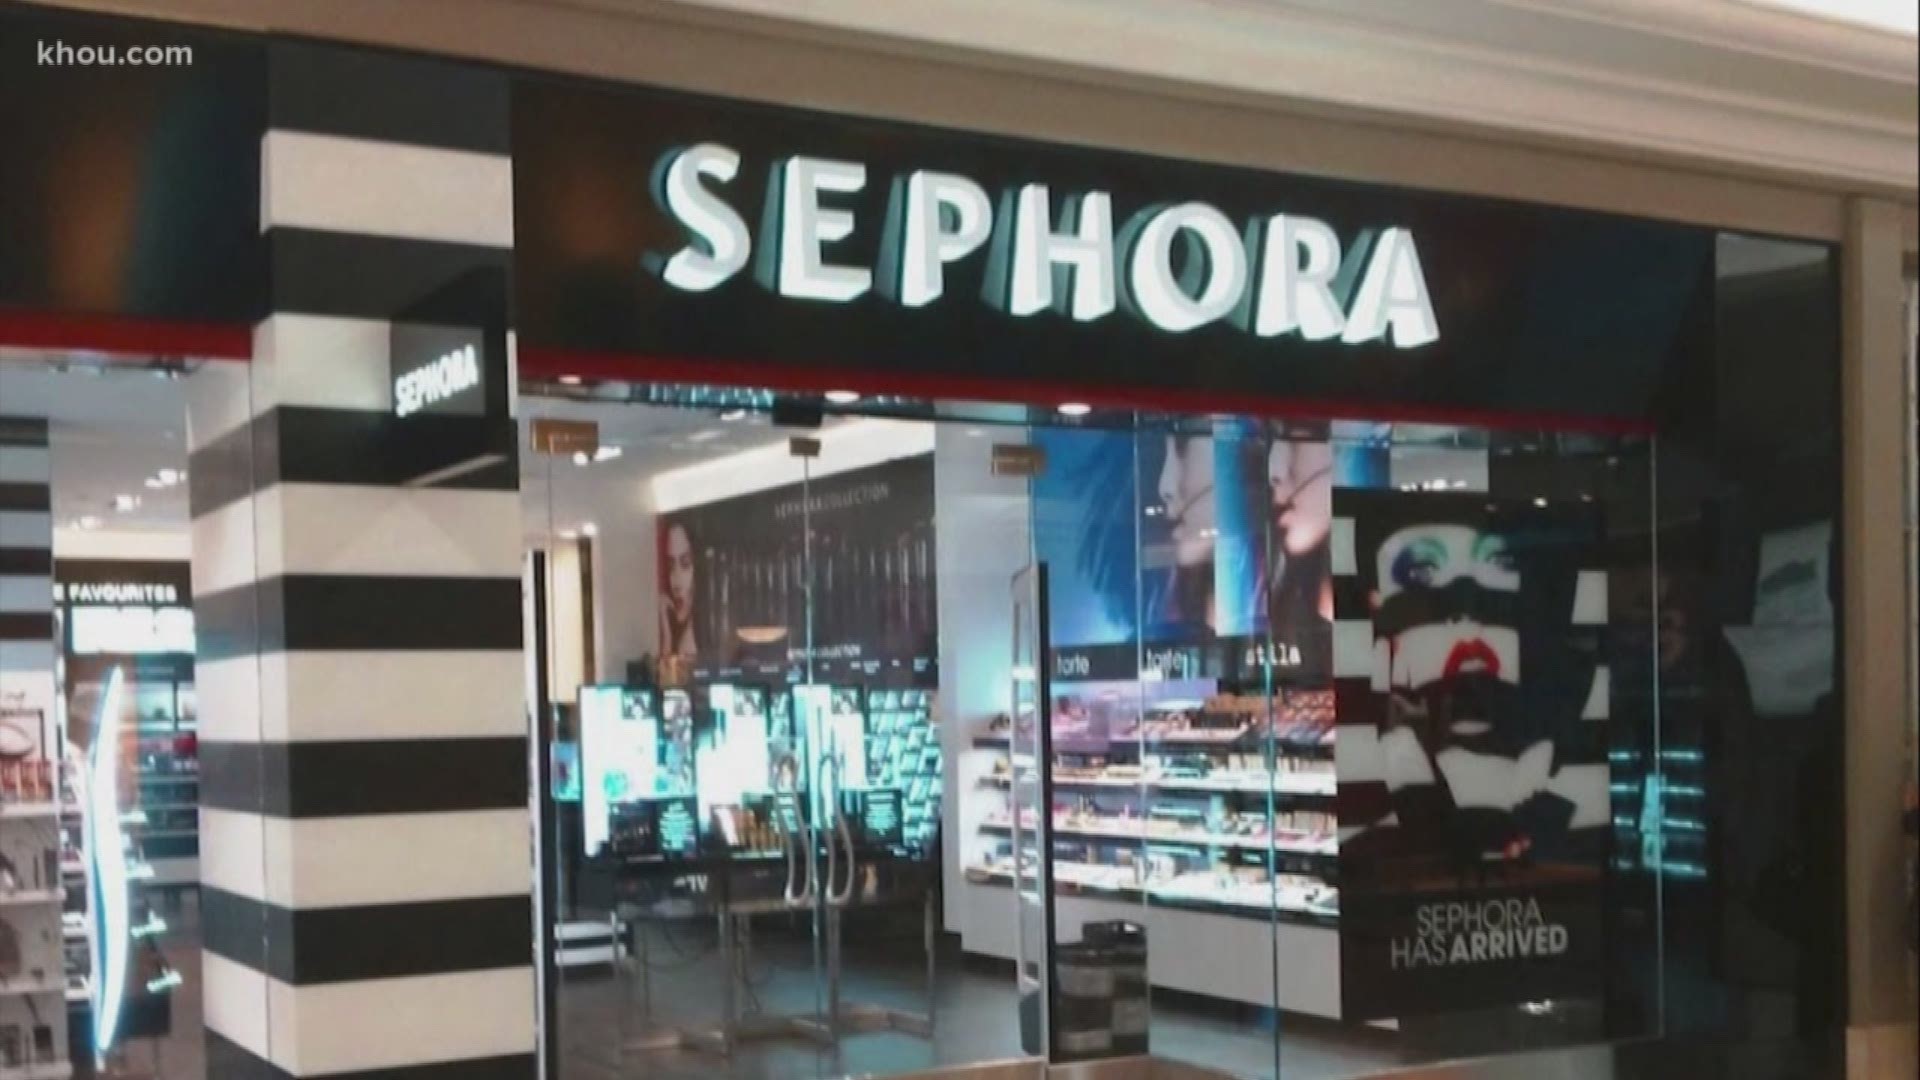 Sephora, Champs Sports, Aéropostale, and White House Black Market will be open for business this spring.